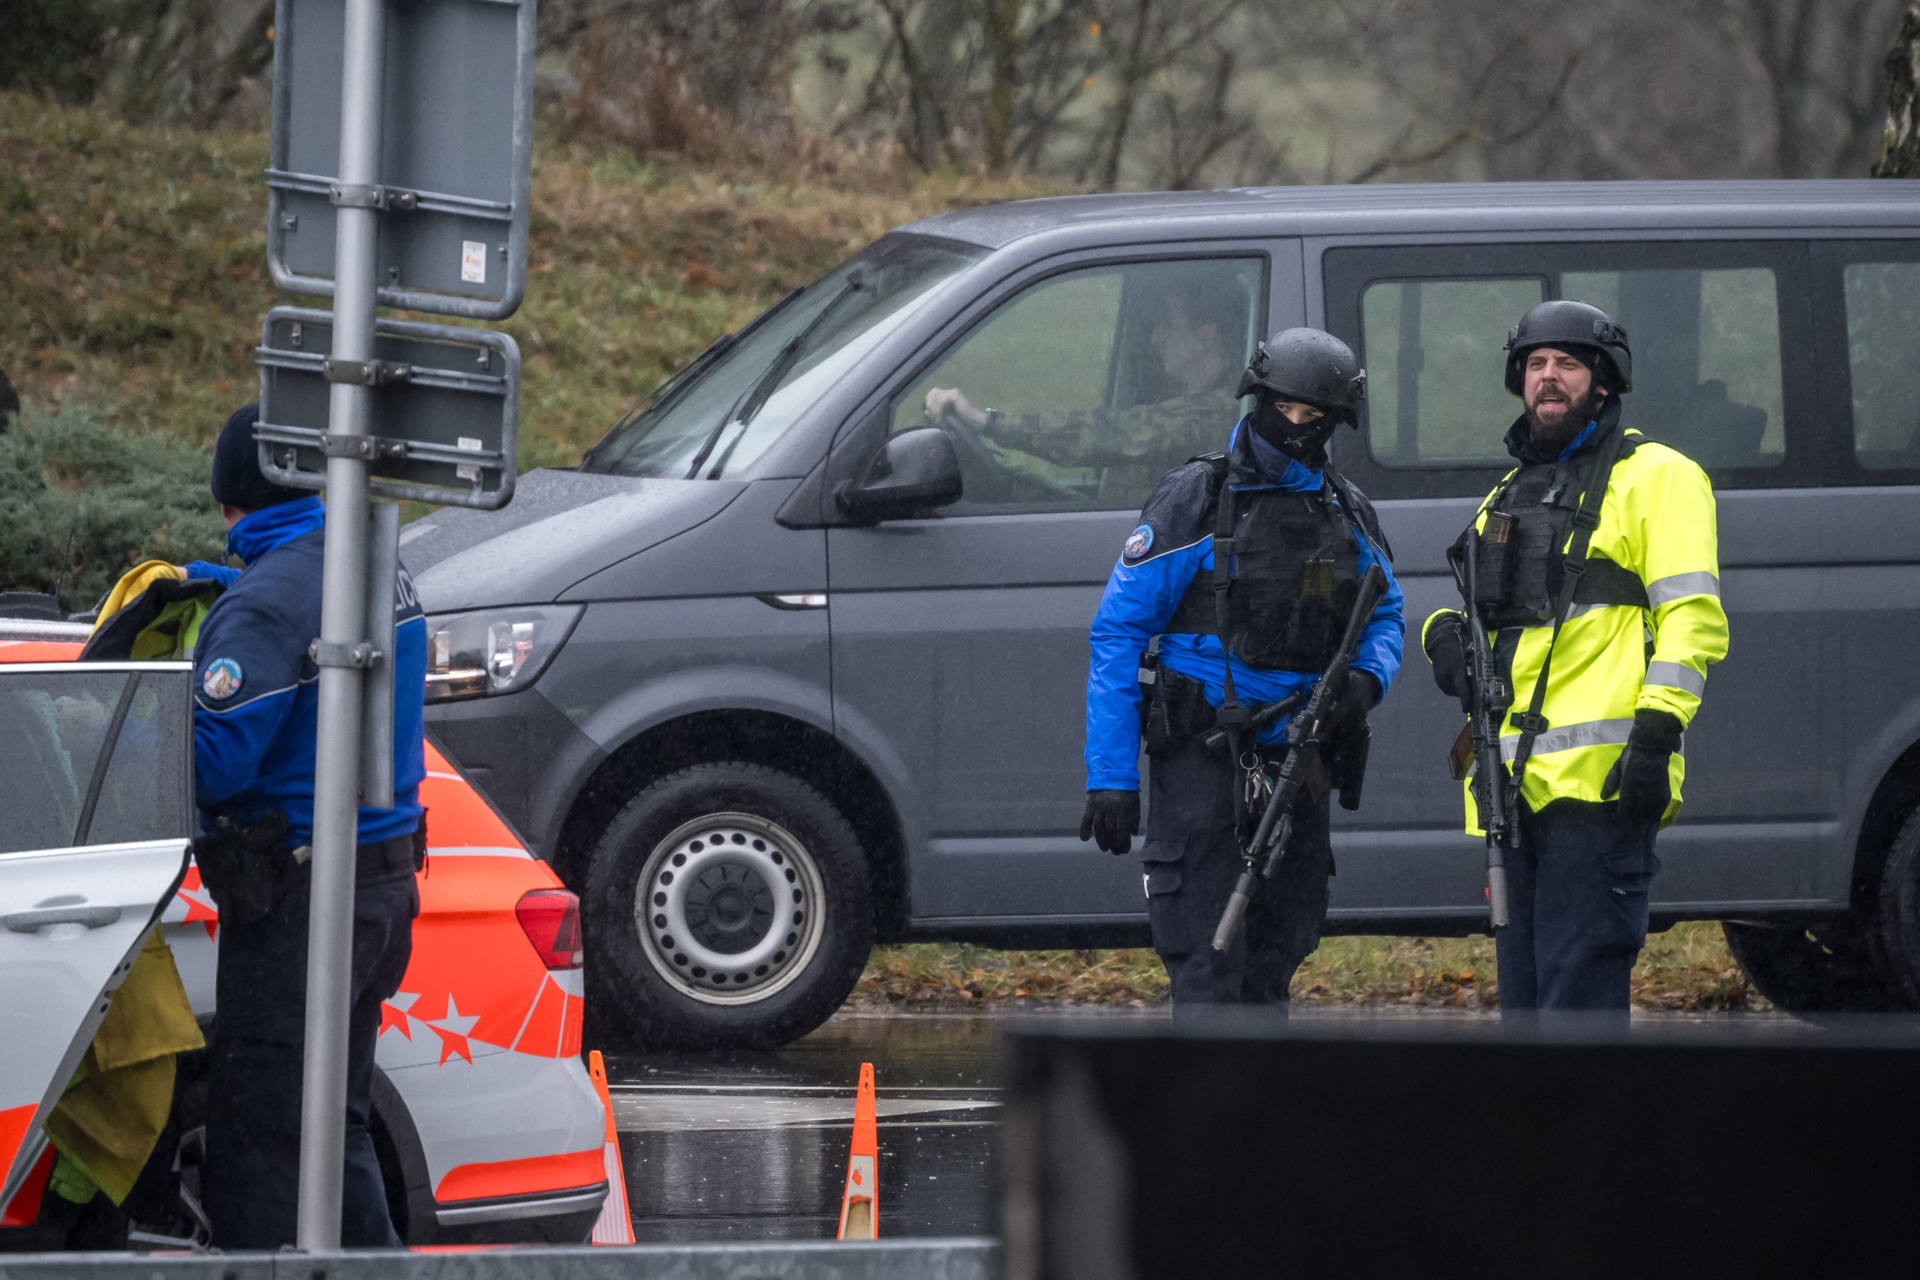 Police officers control cars near Saint Maurice, as they search for a gunman who killed two people and injured another in the southern Swiss town of Sion, on December 11, 2023. Police said a man fired shots at people in two distinct locations in the picturesque town in the Alpine Wallis region shortly before 8 am (0700 GMT). (Photo by Fabrice COFFRINI / AFP) (Photo by FABRICE COFFRINI/AFP via Getty Images)